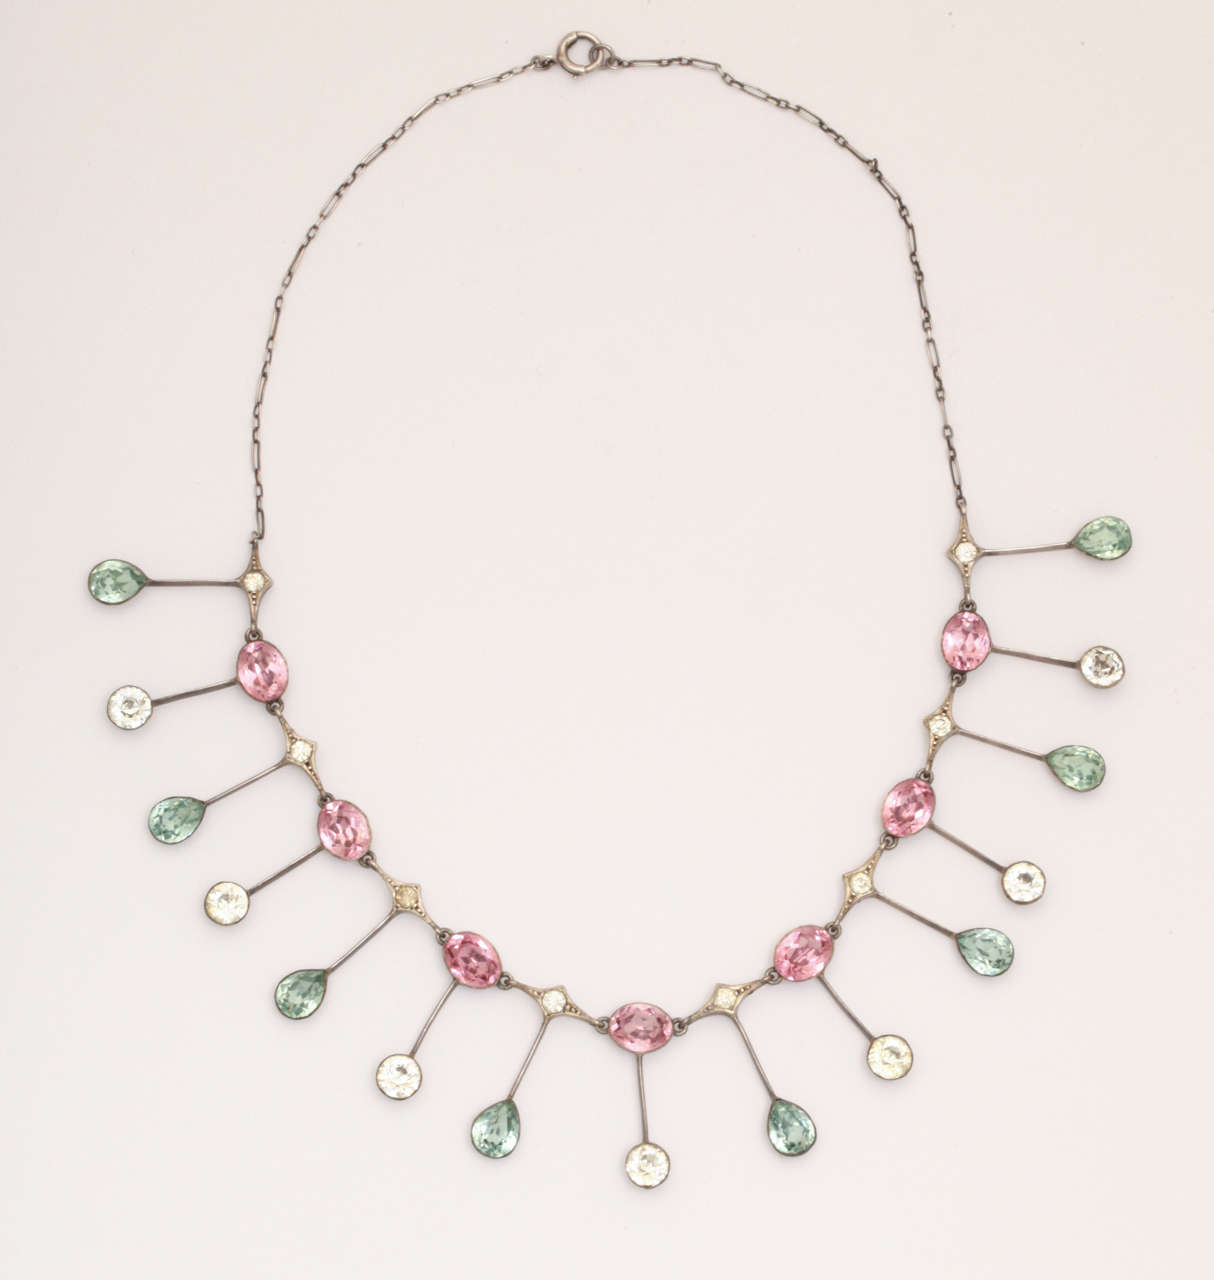 Set in sterling silver circa 1900, a rare array of aqua, pink and clear pastes sit on the neck like rays of the sun. I have not seen this design before and it is sublime.  Fifteen rays emanate from pink and clear pastes and from diamond shaped